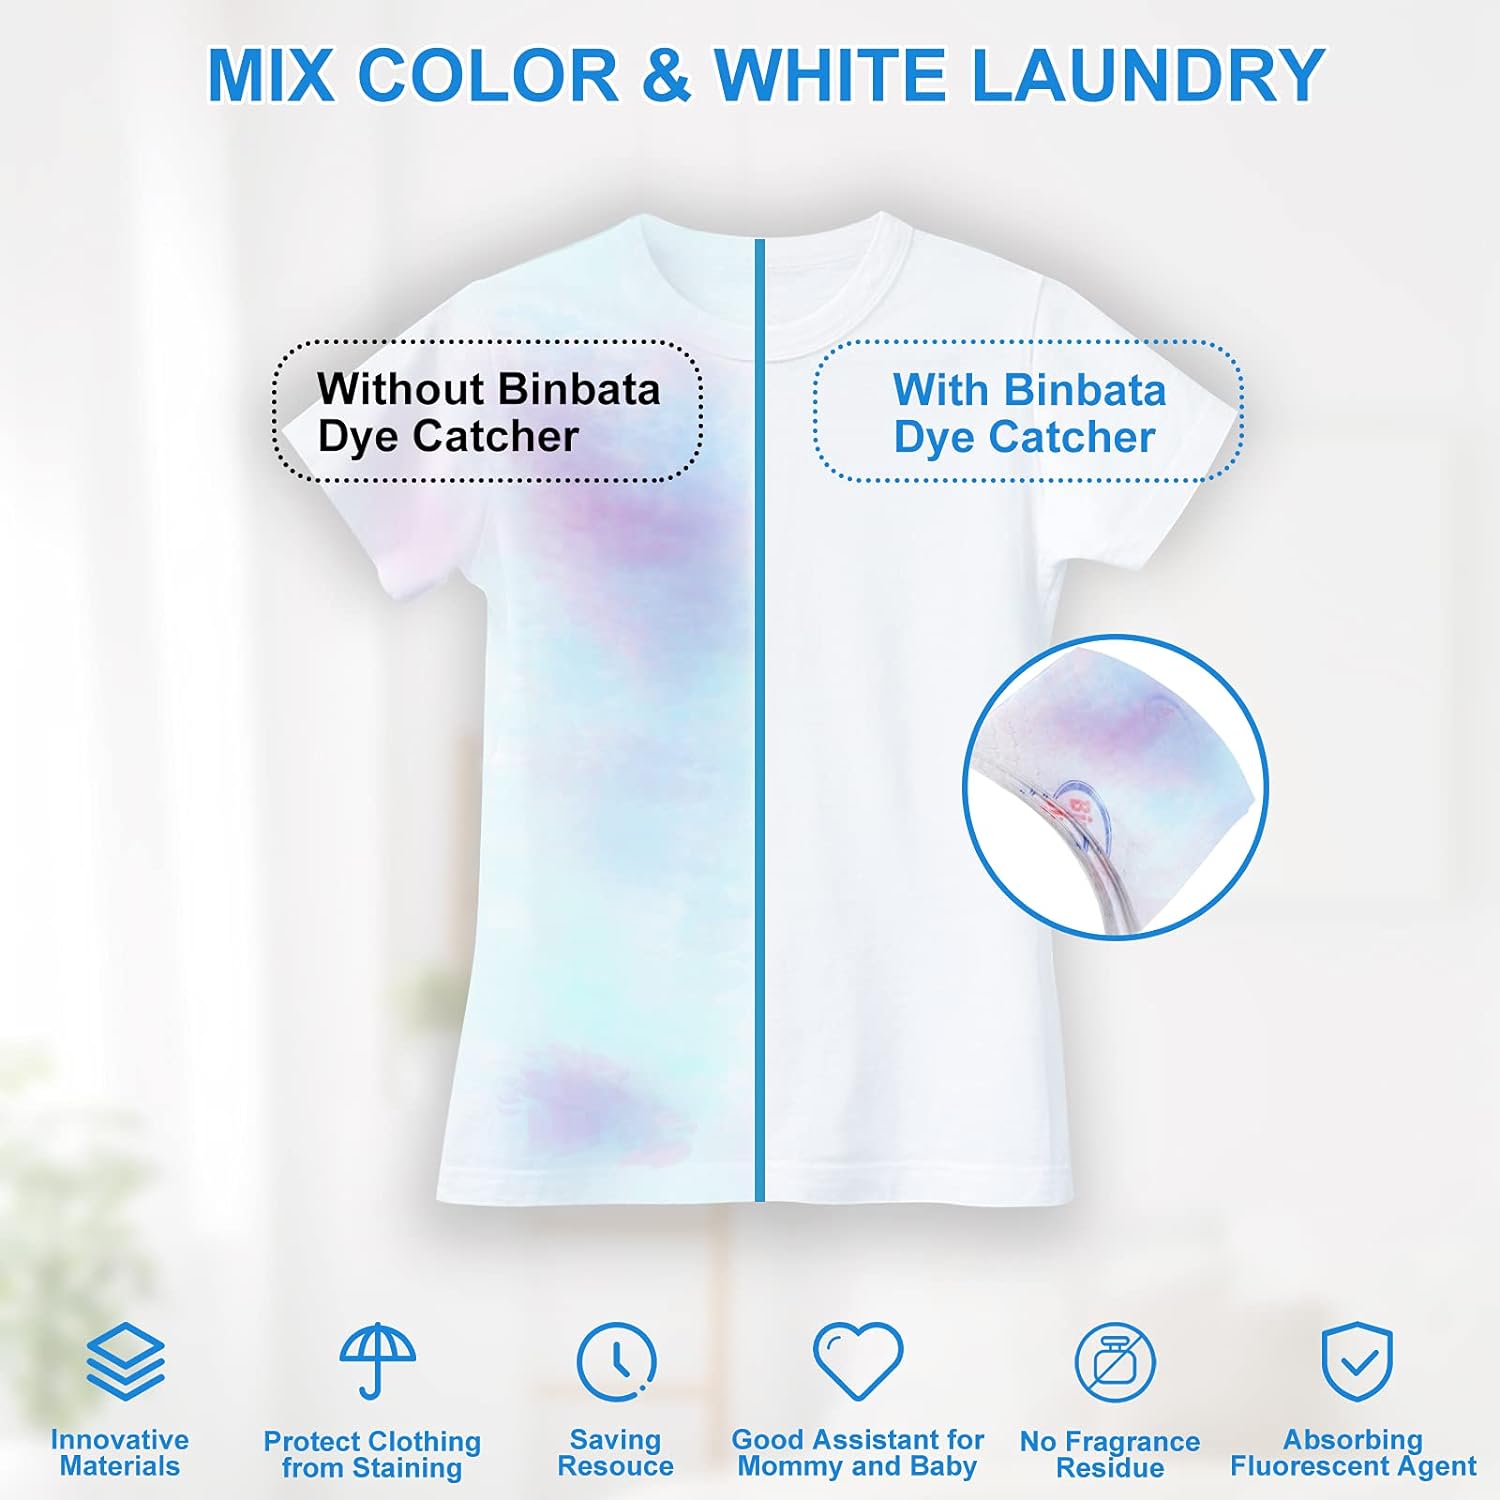 Binbata Color Grasper for Laundry 110 Count, Fragrance Free Dye Catcher Essential for Home Use, Dye Guard Grabber Sheets for Laundry in-Wash Sheets : Health & Household